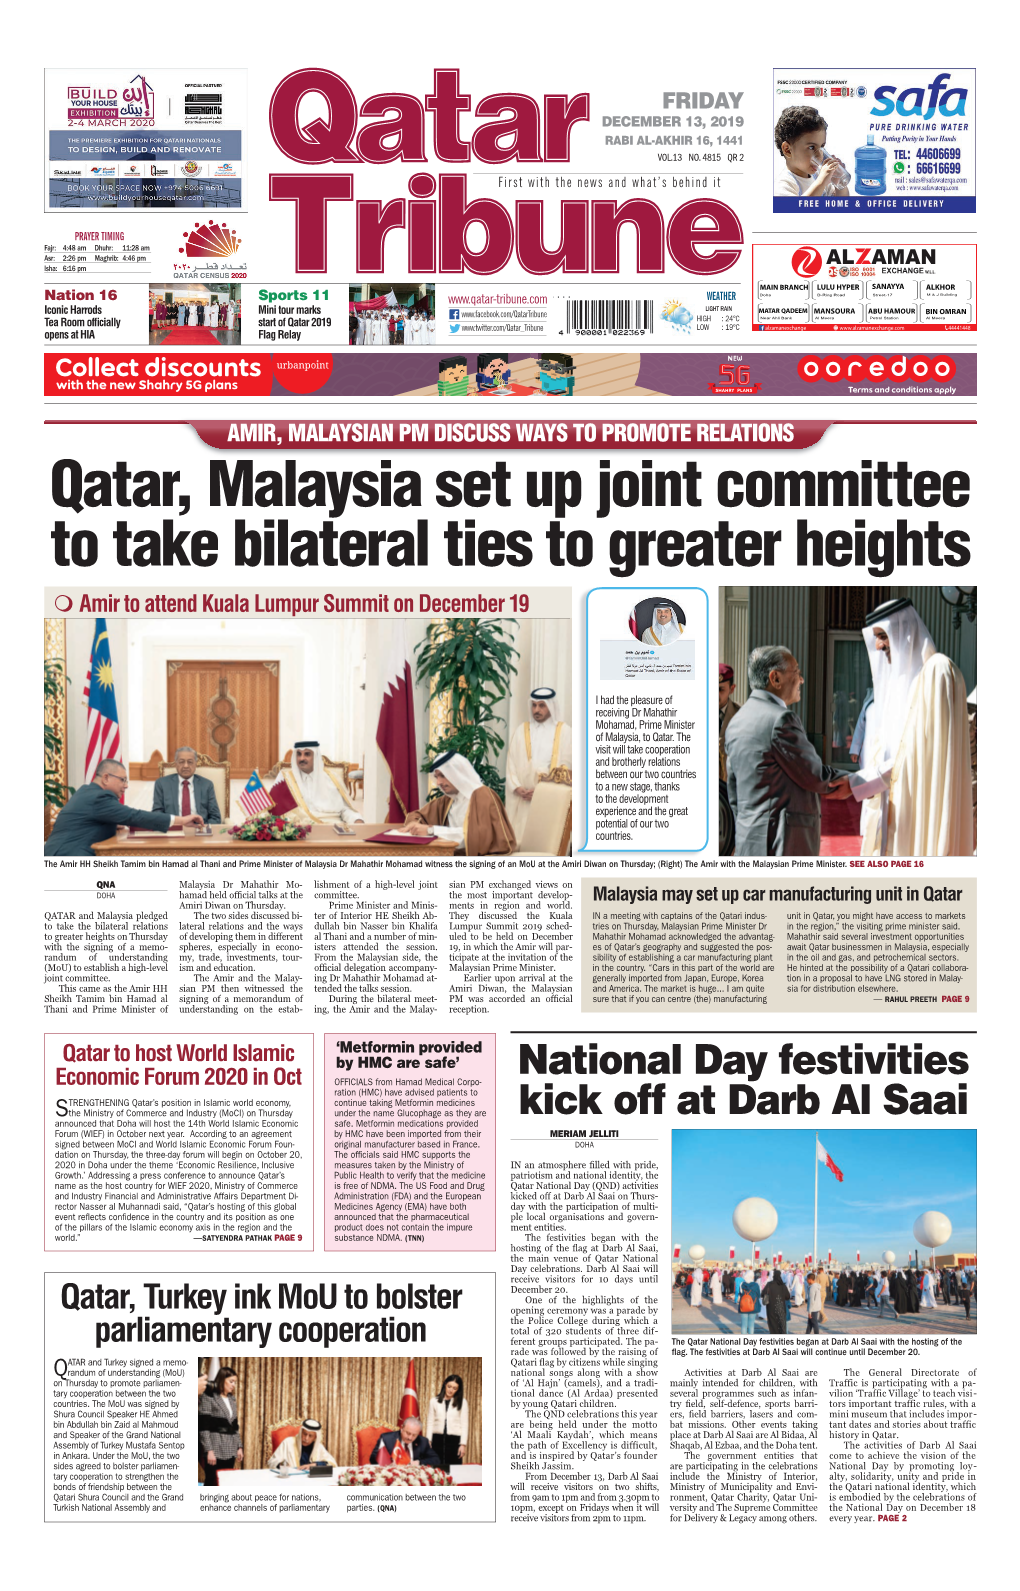 Qatar, Malaysia Set up Joint Committee to Take Bilateral Ties to Greater Heights � Amir to Attend Kuala Lumpur Summit on December 19